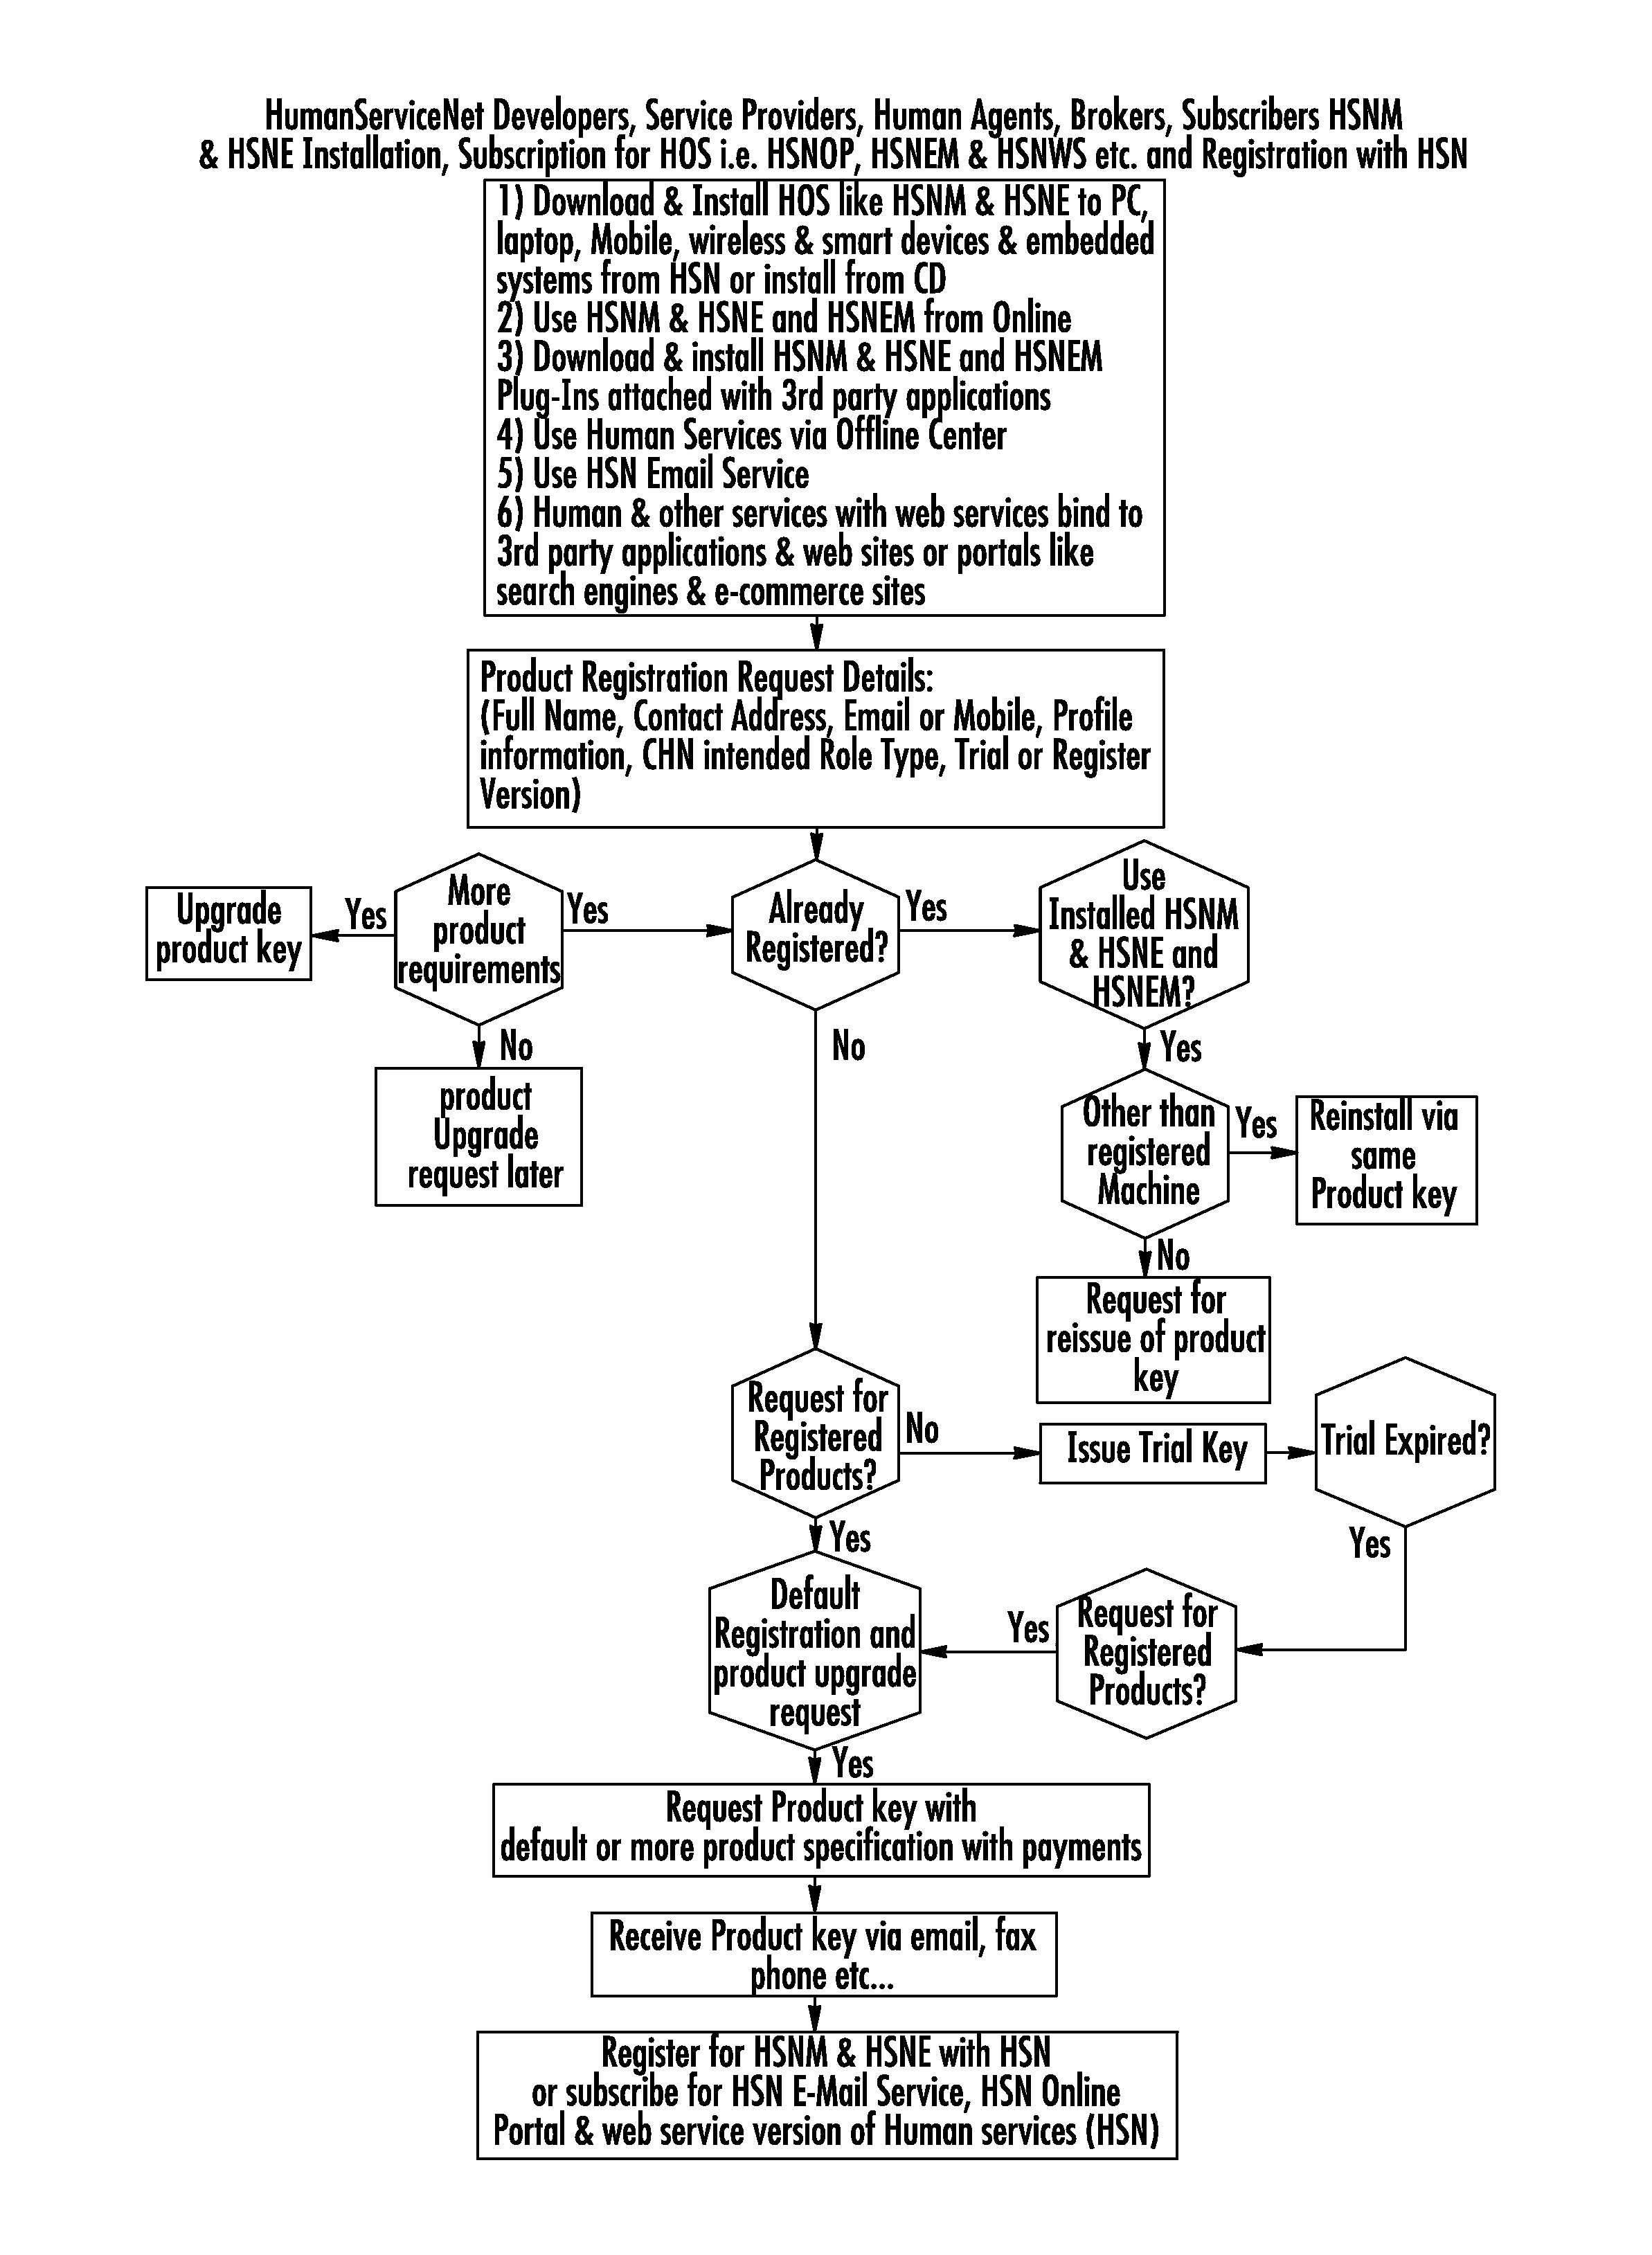 System and method of targeting advertisements and providing advertisements management